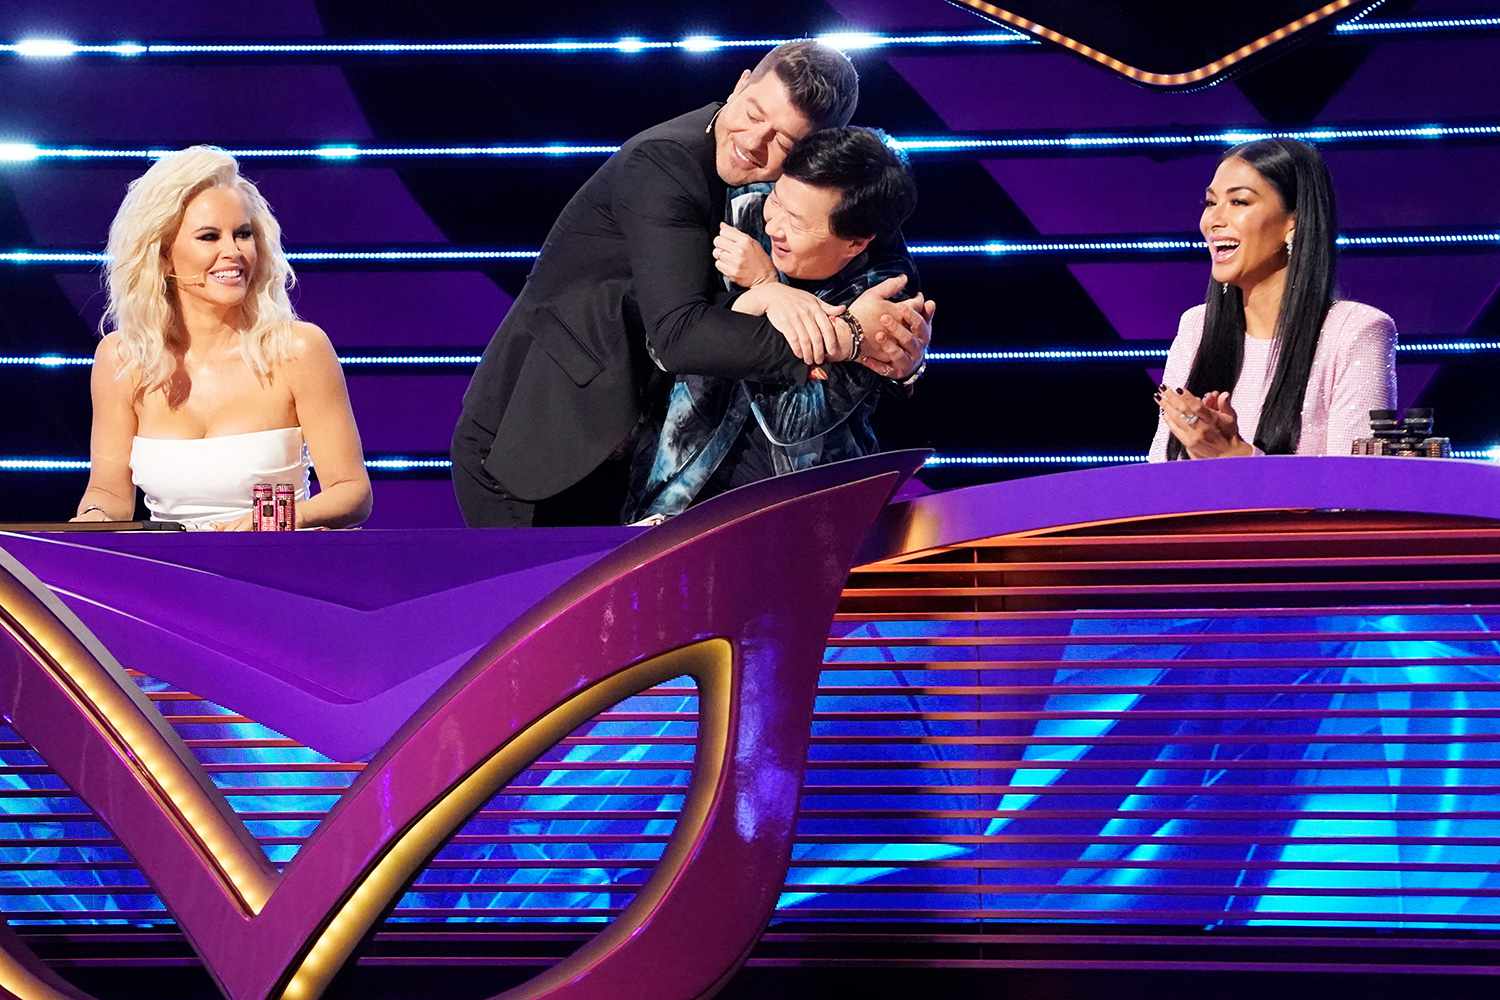 THE MASKED SINGER: L-R: Panelists Jenny McCarthy, Robin Thicke, Ken Jeong and Nicole Scherzinger in the &ldquo;A Brand New Six Pack: Group B Kickoff!&rdquo;